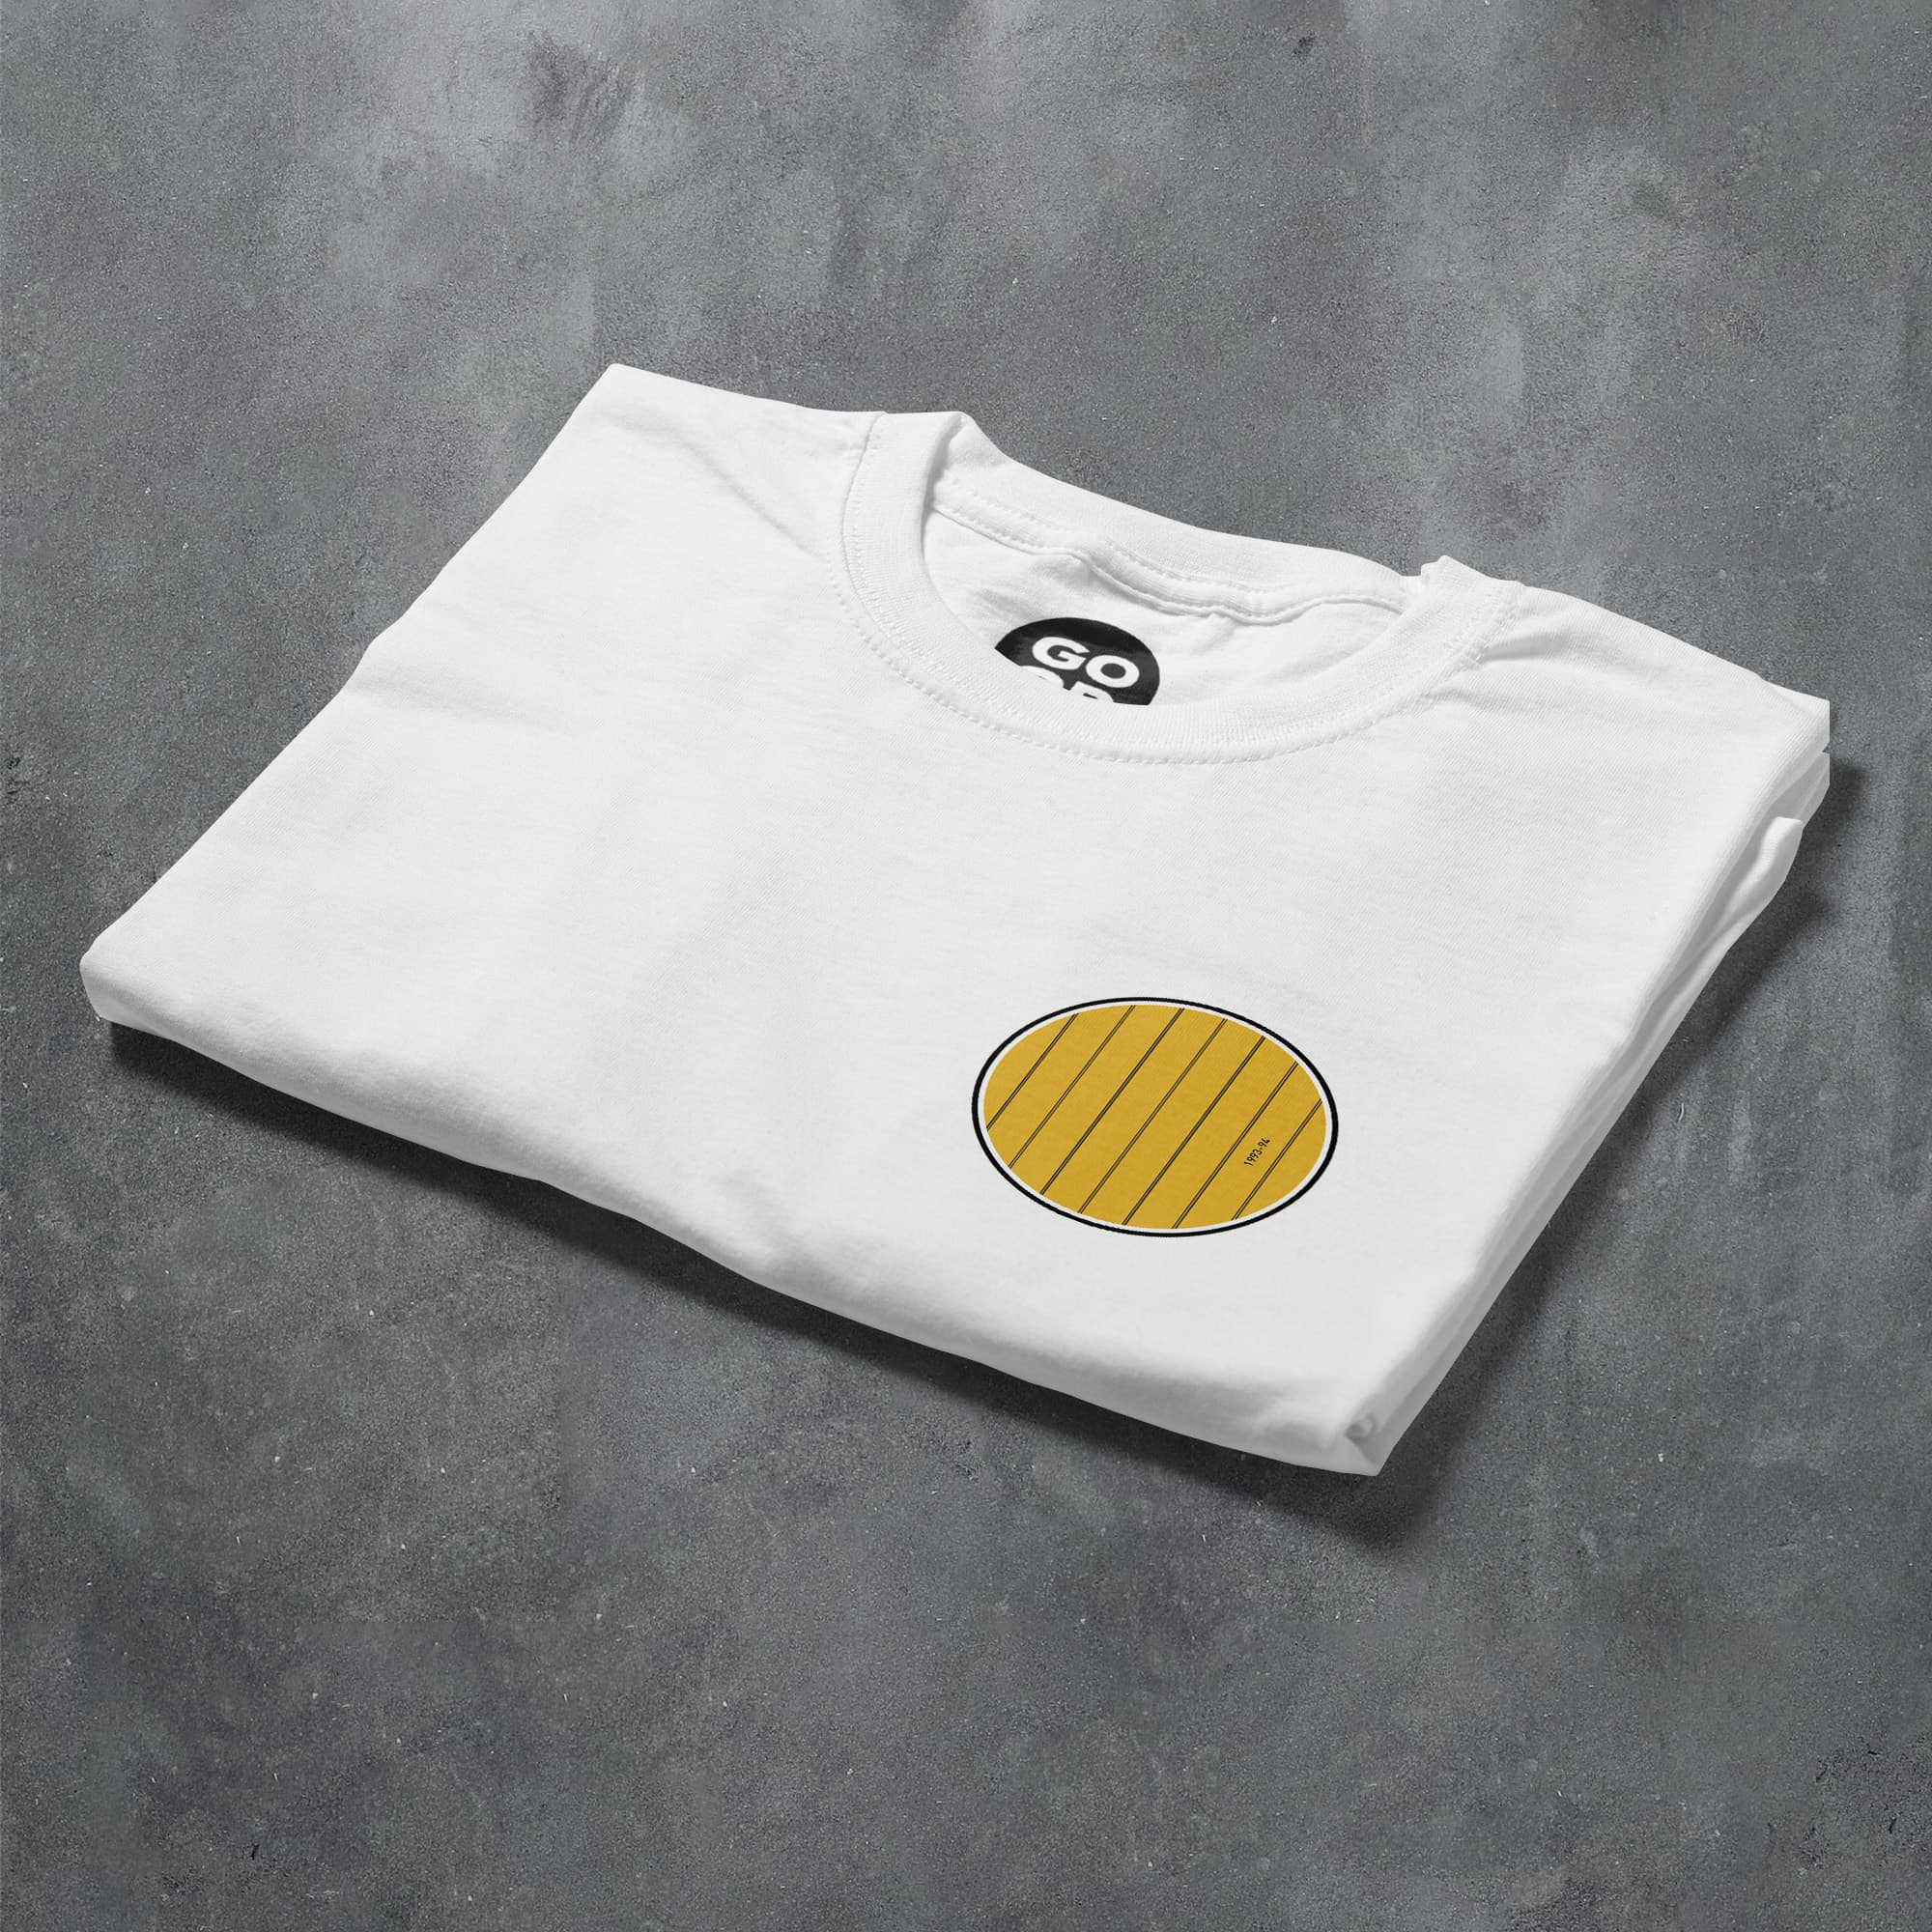 a white t - shirt with a yellow circle on it